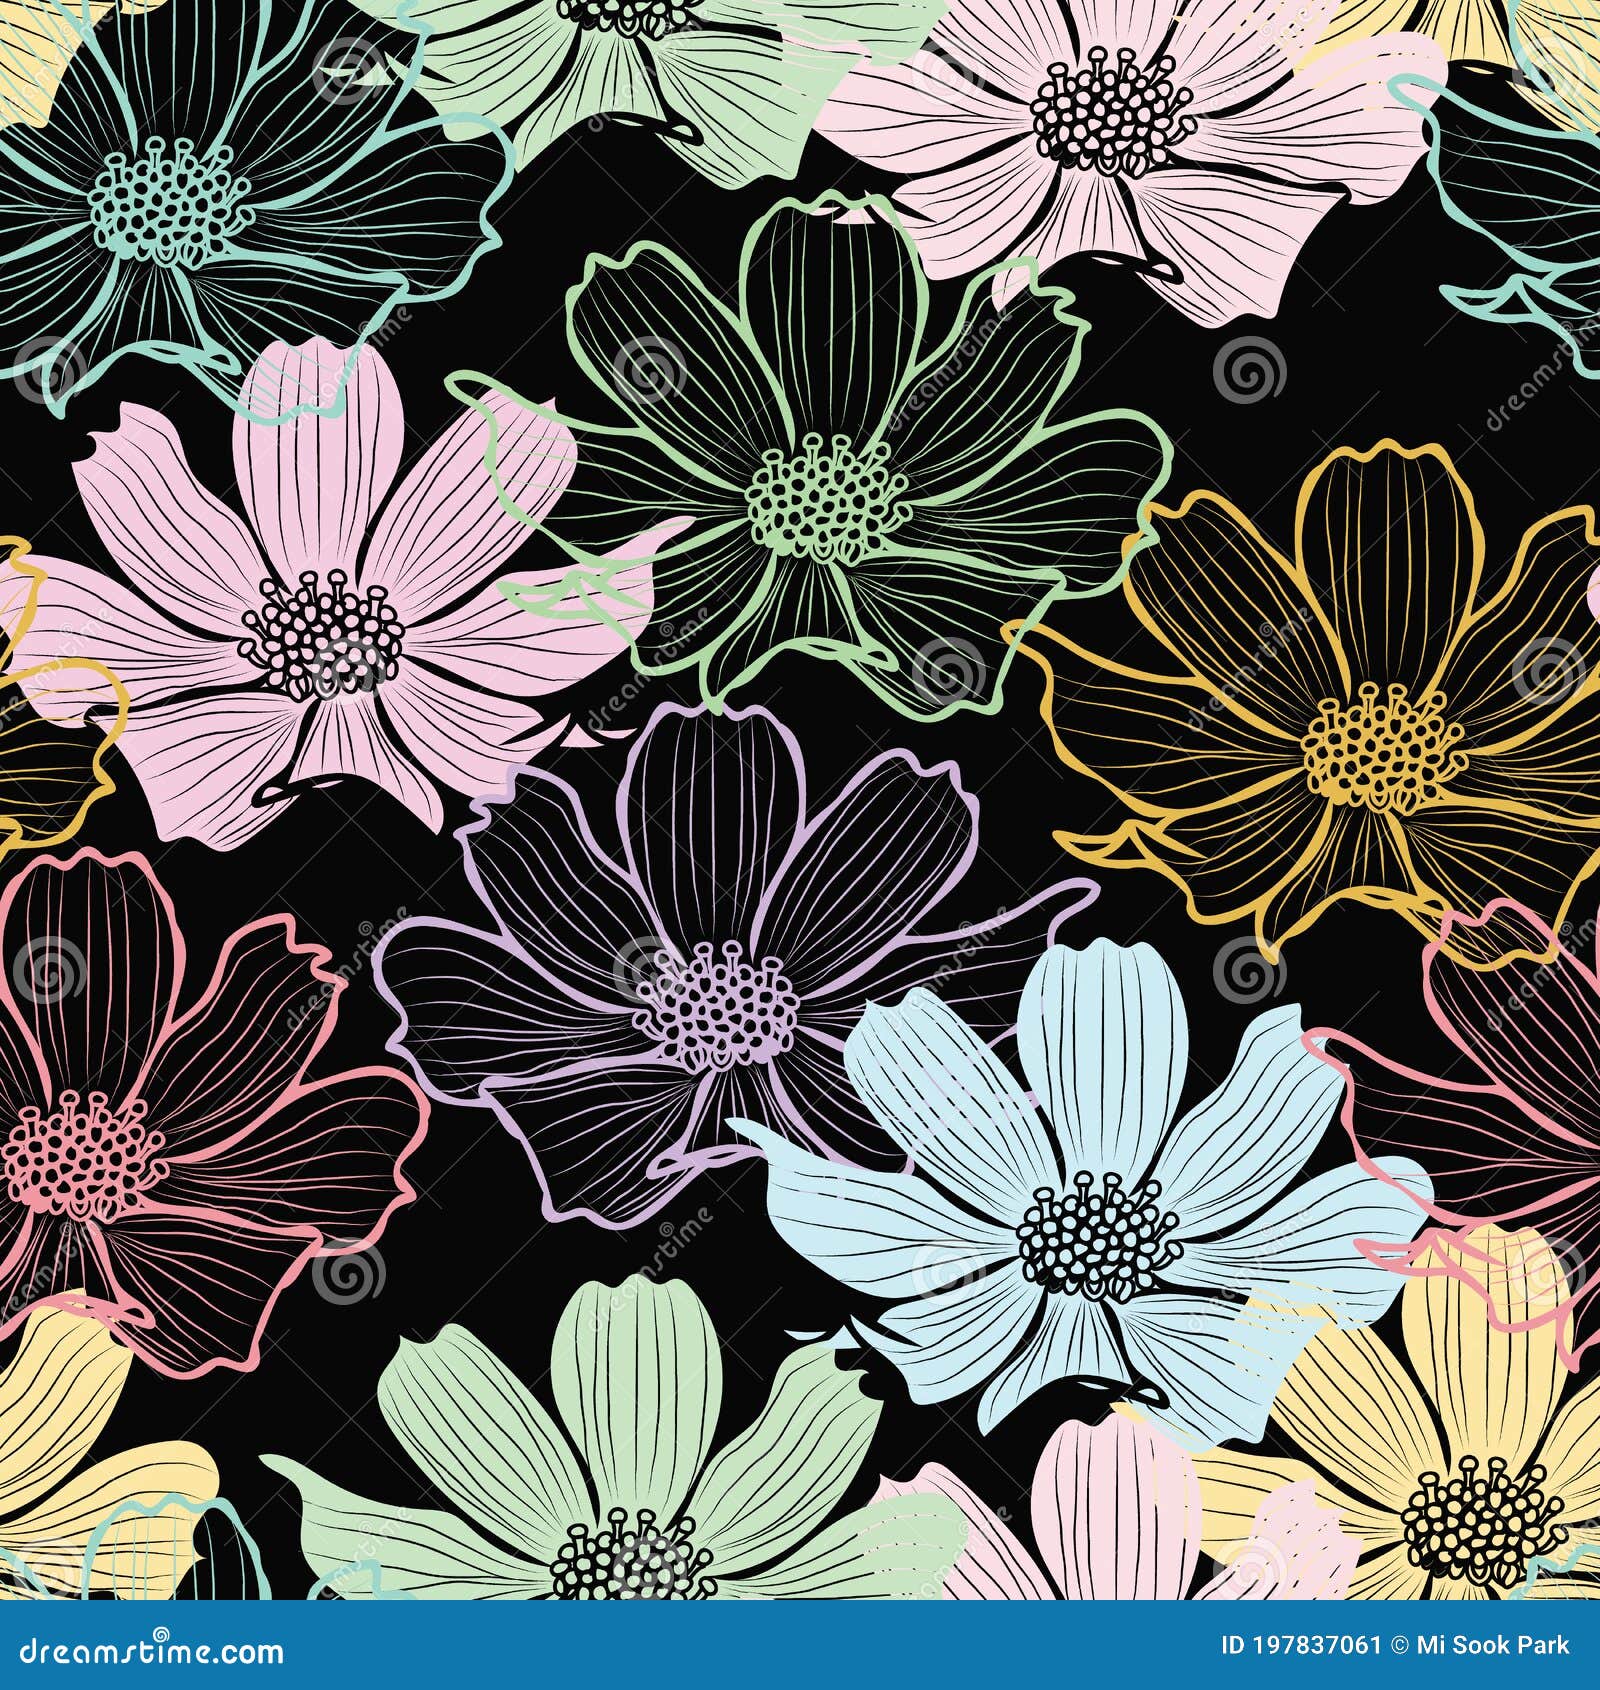 Floral Seamless Pattern with Cosmos Flower. Pastel Outline Flowers on Black  Background Design Stock Vector - Illustration of outline, decor: 197837061